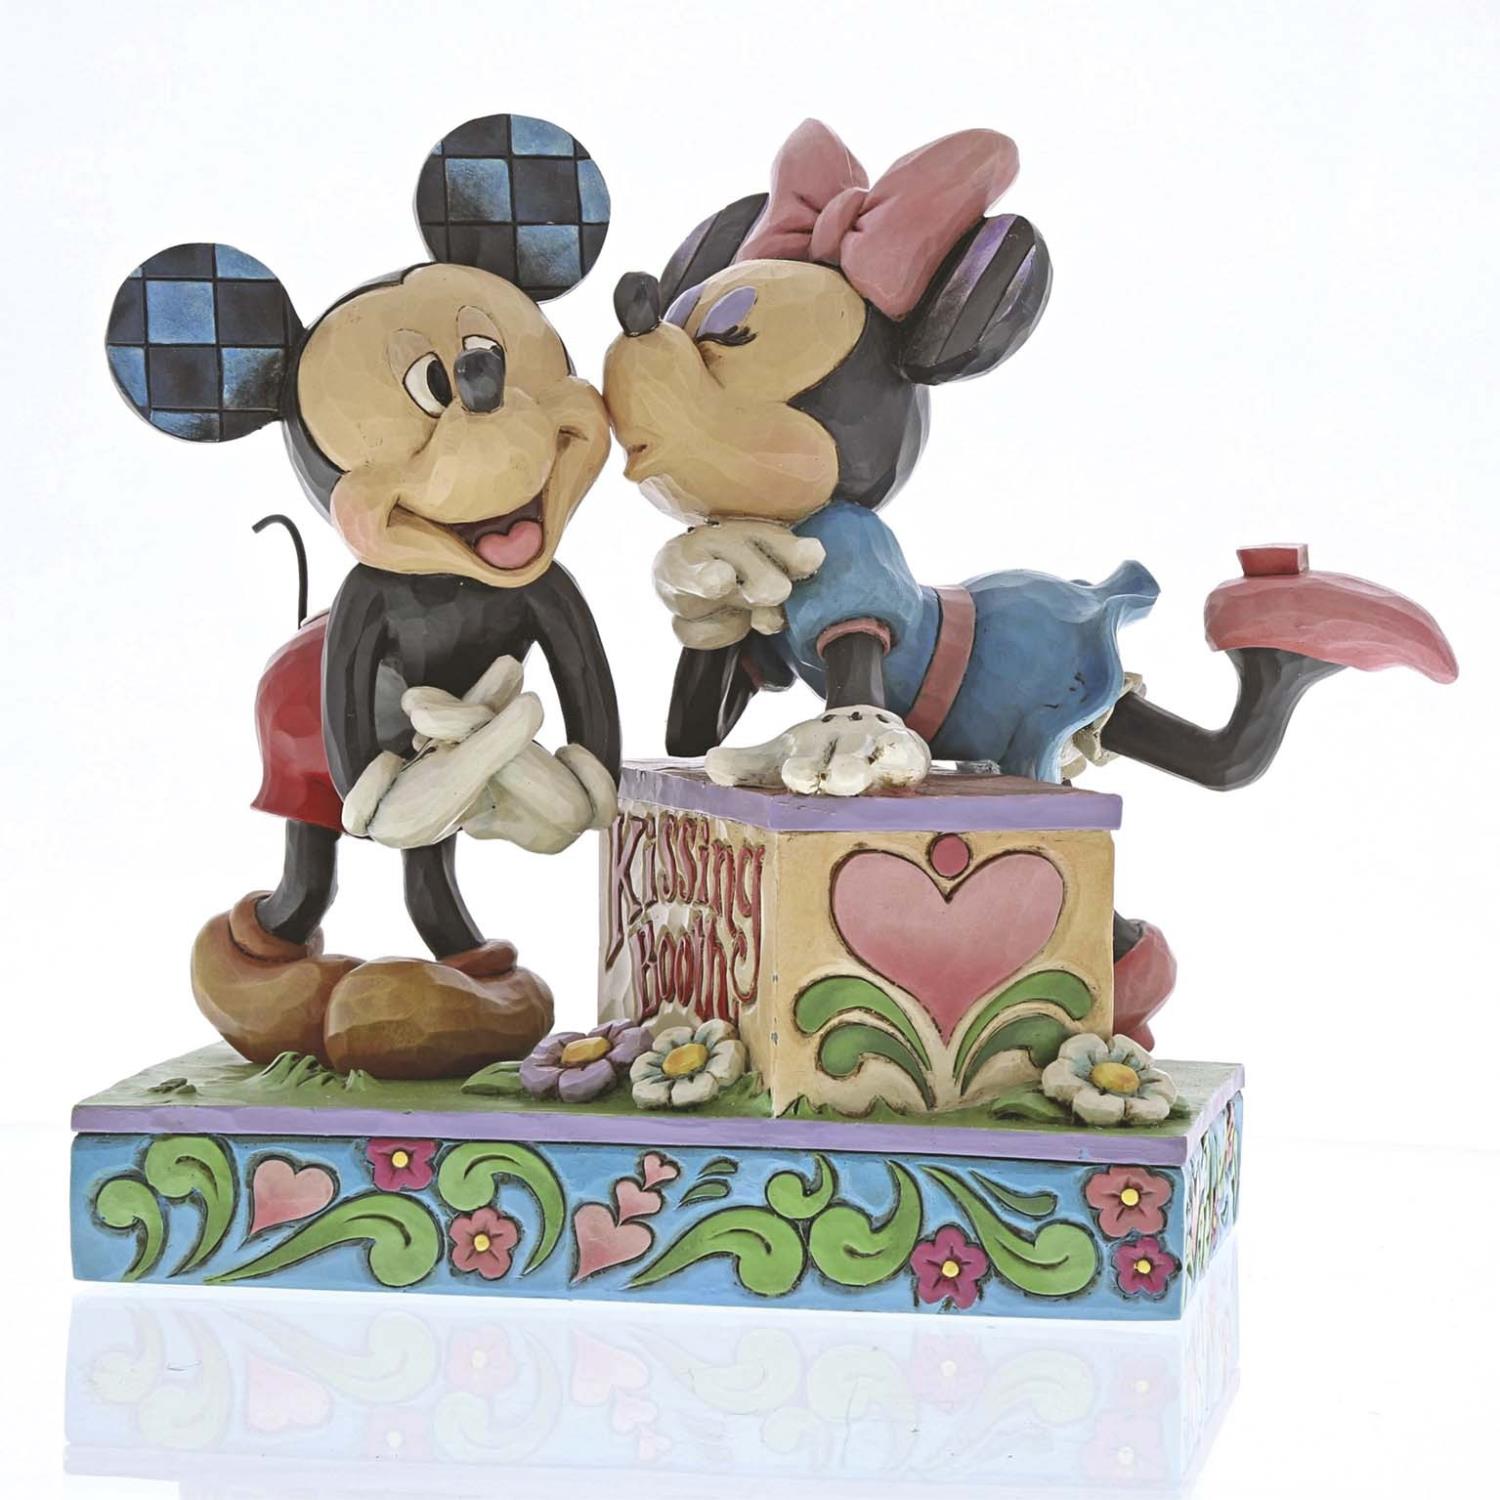 Kissing Booth Mickey & Minnie